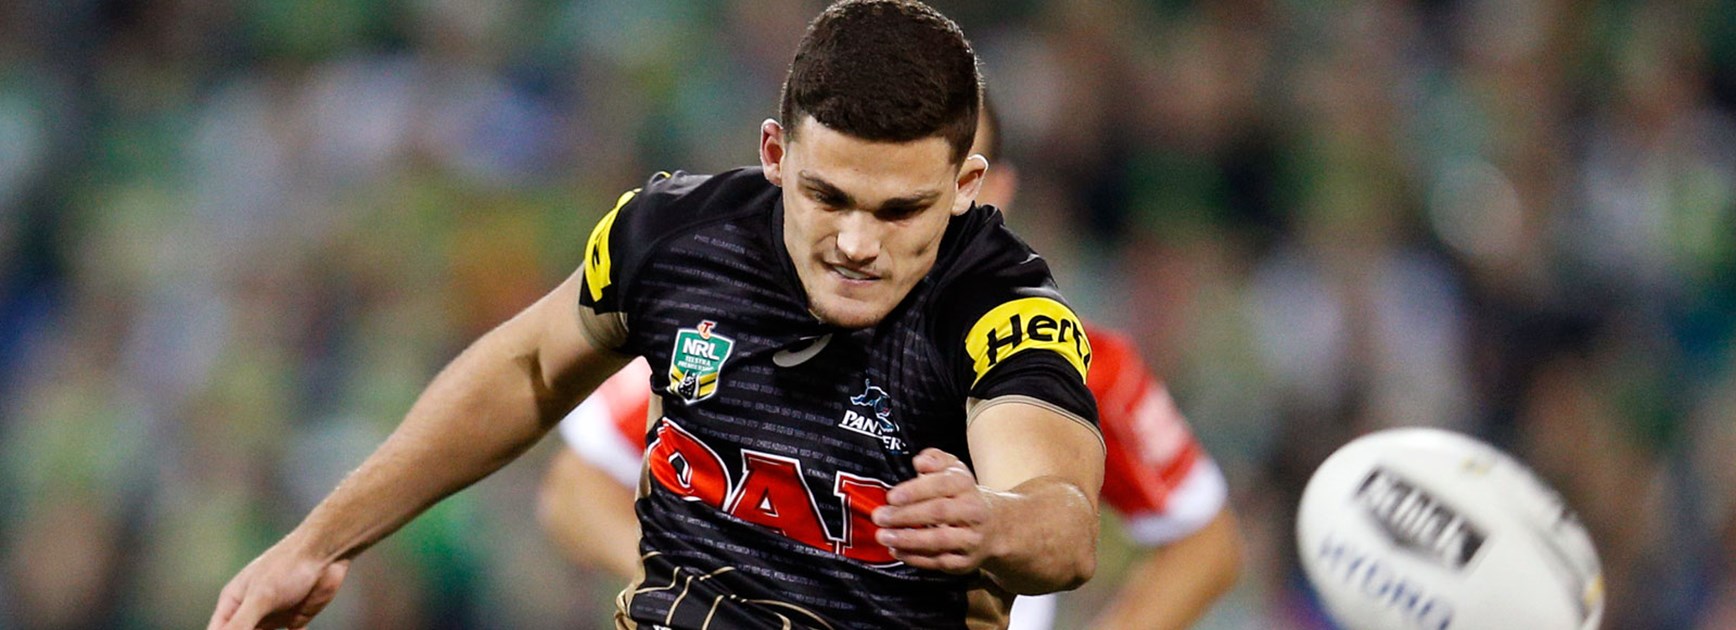 Panthers halfback Nathan Cleary against the Raiders in Finals Week 2.